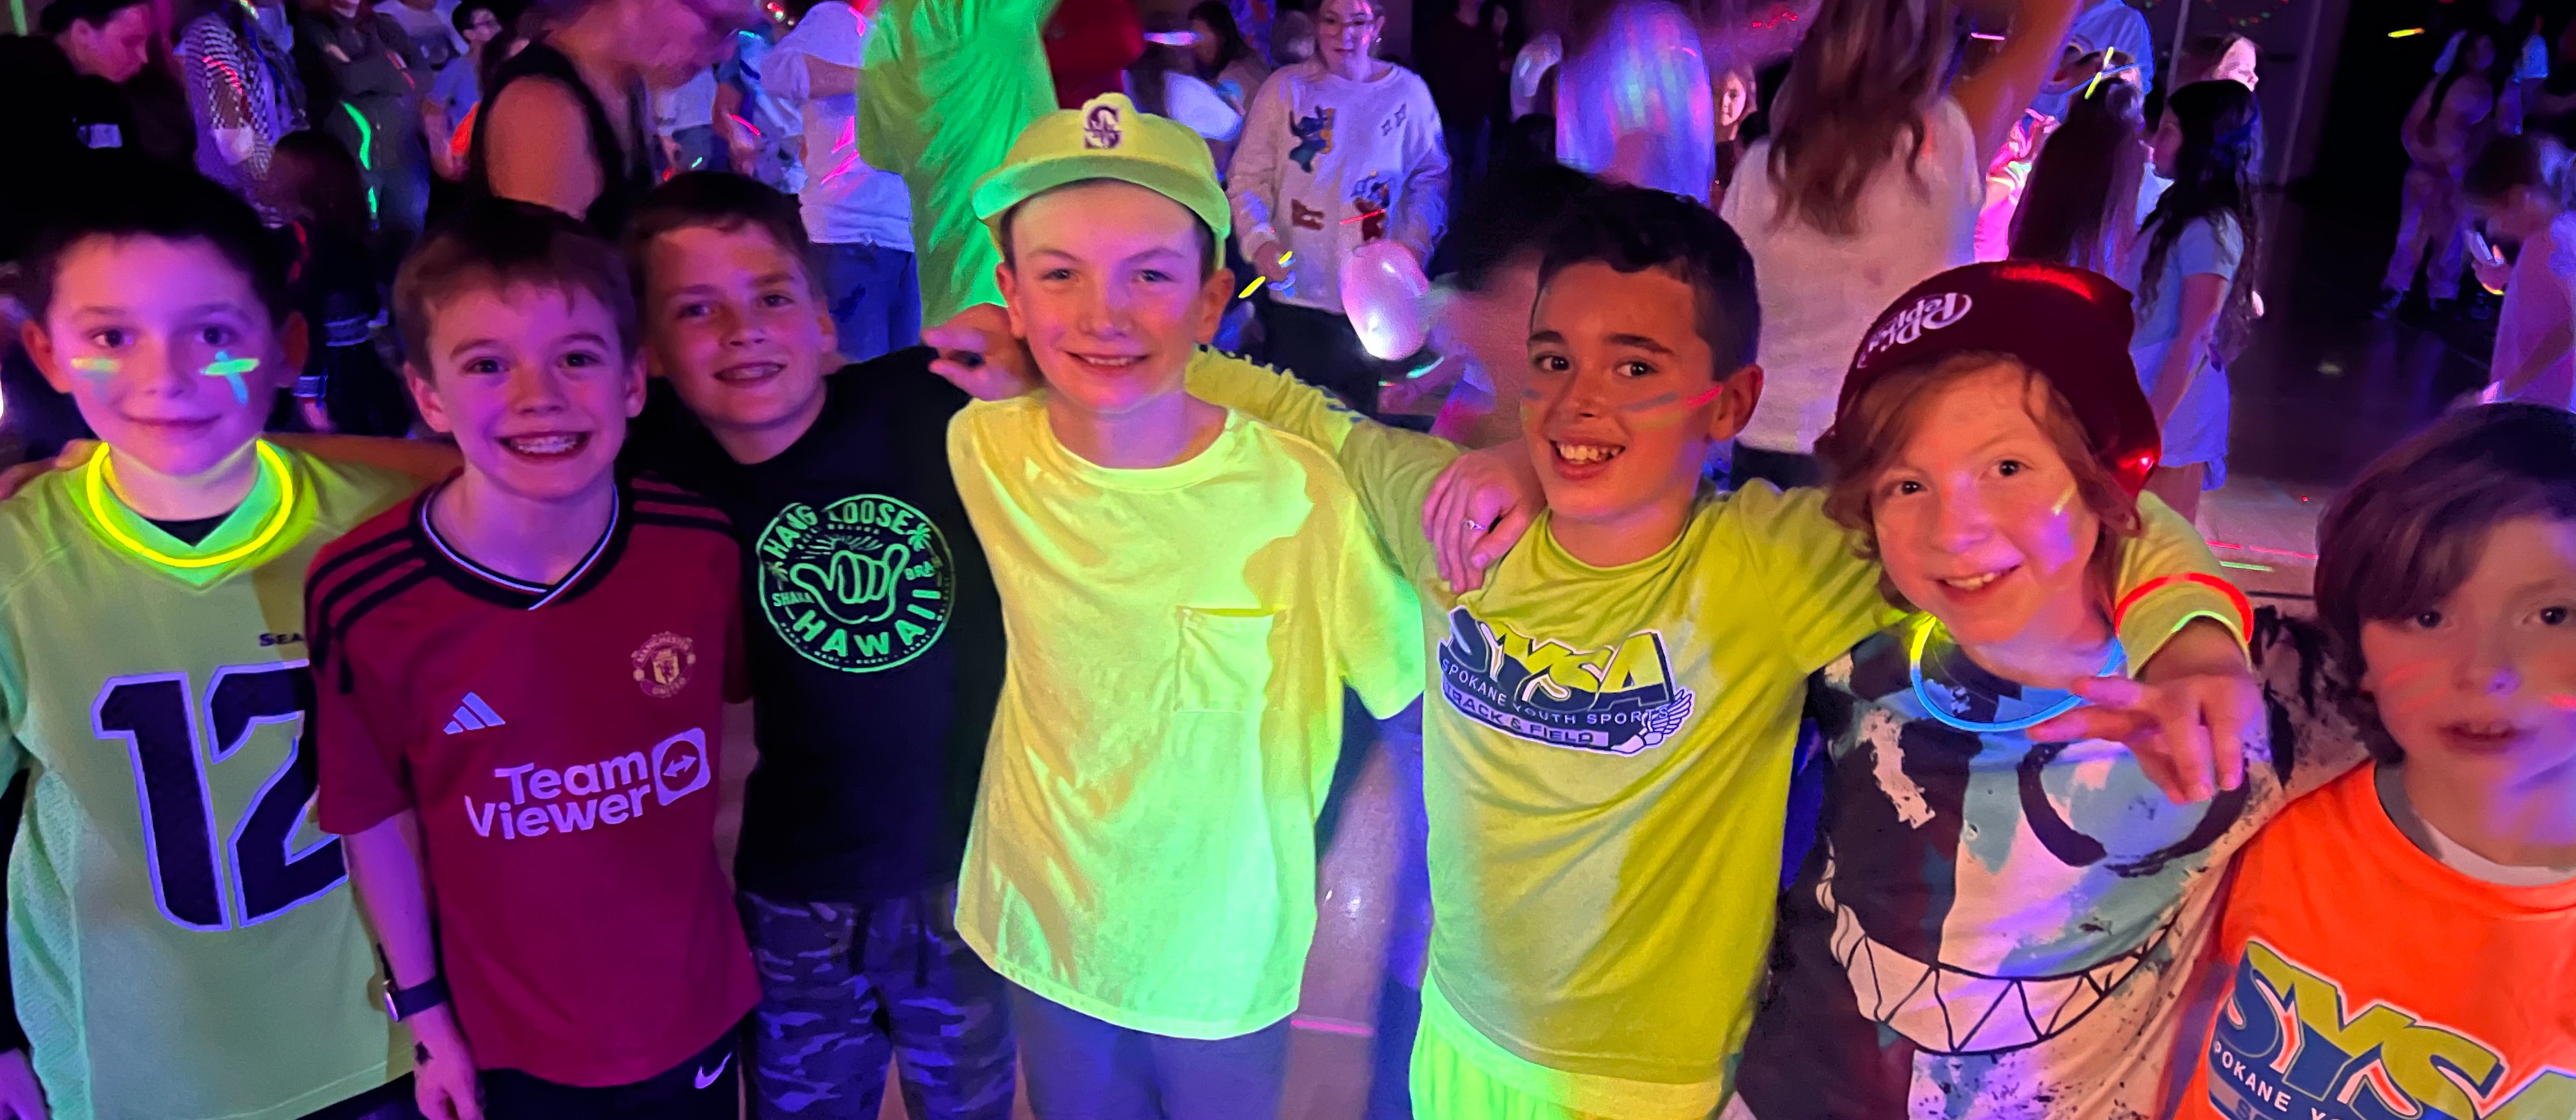 Kids at glow party